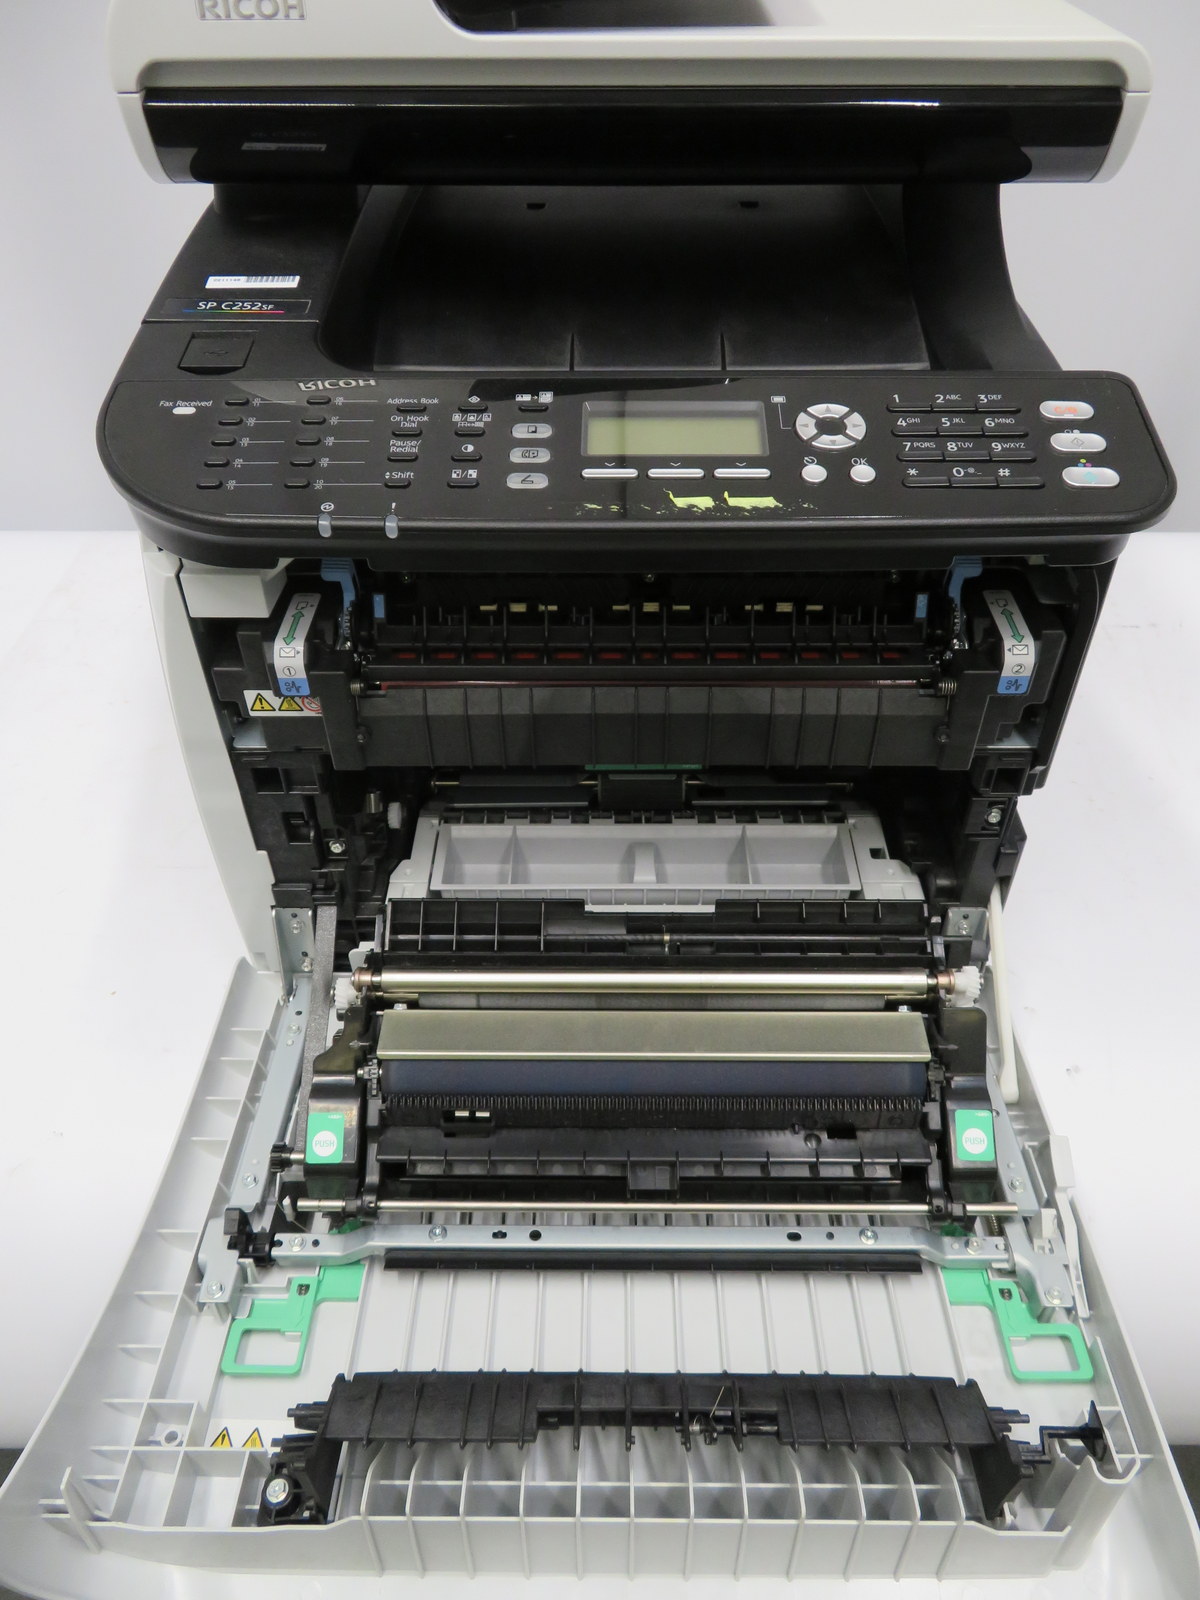 Ricoh SPC25SF printer / fax & scanner. Serial number:X115P201620. - Image 5 of 6